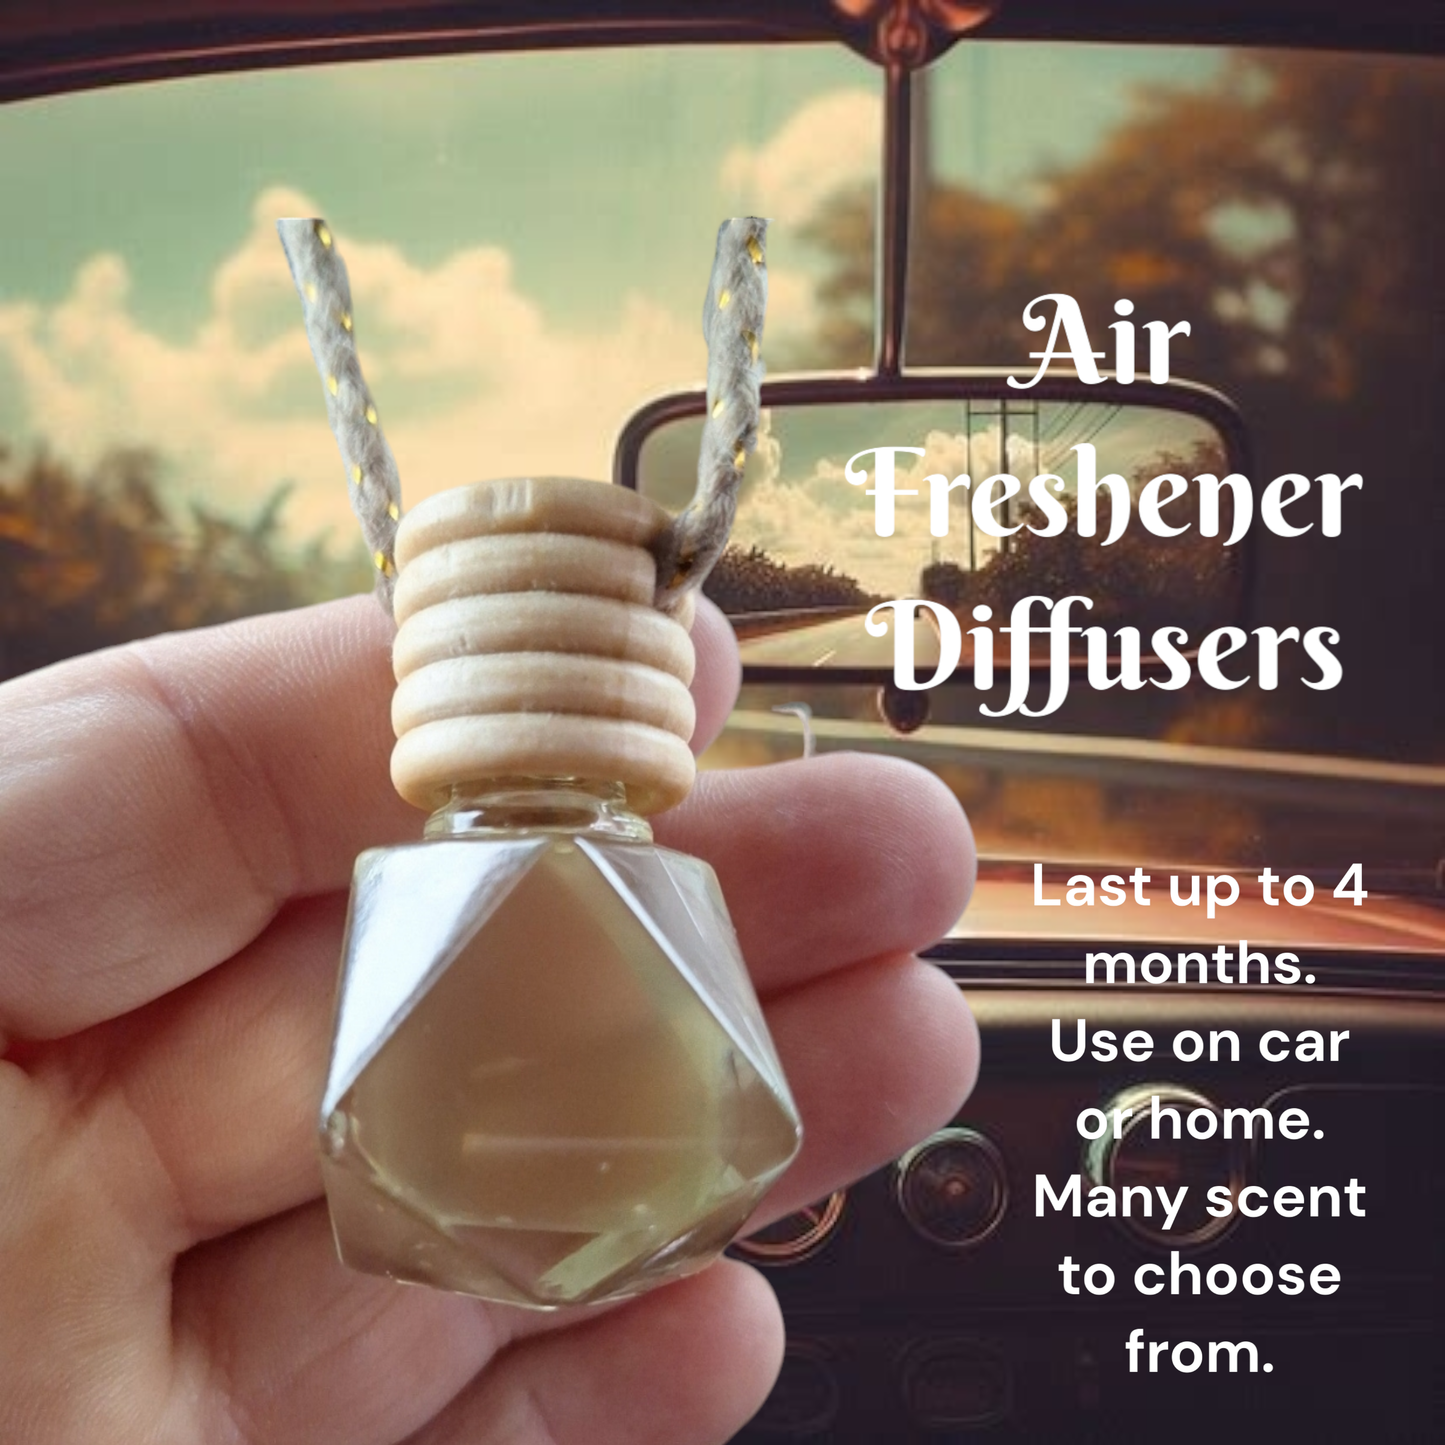 Birthday Cake Air Freshener Diffuser for your car or home.